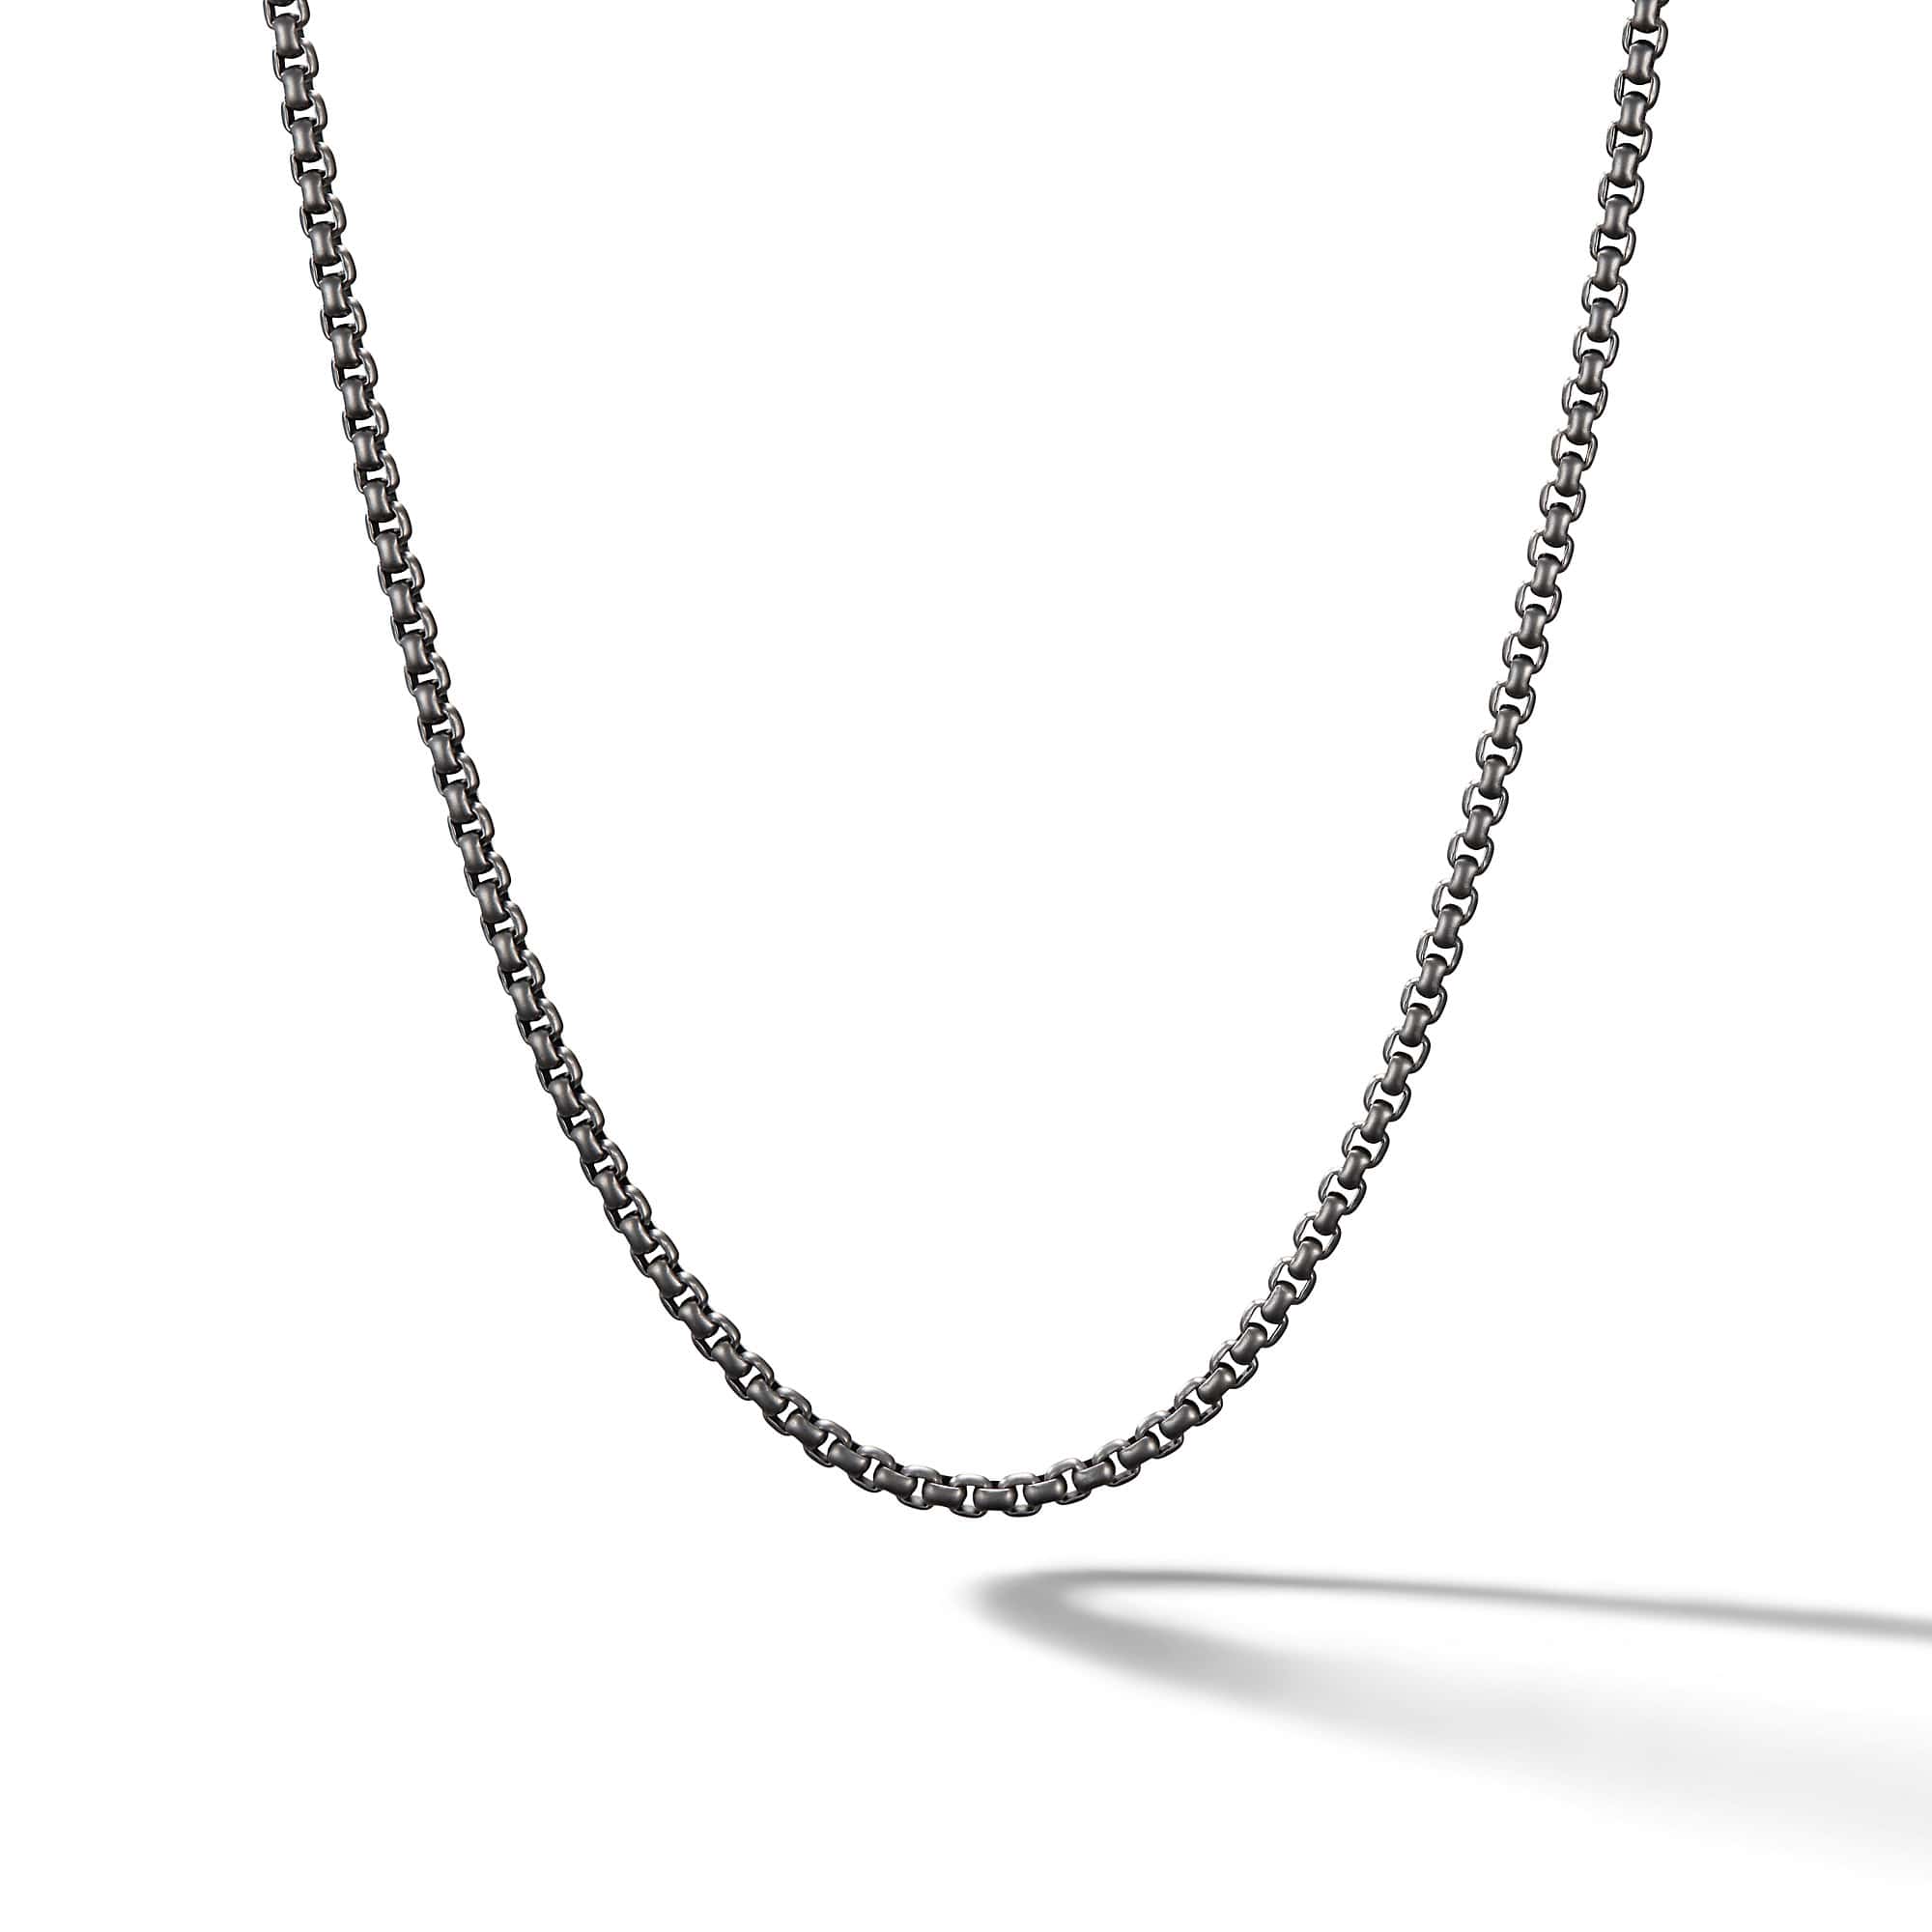 Box Chain Necklace In Darkened Stainless Steel, 2.7mm